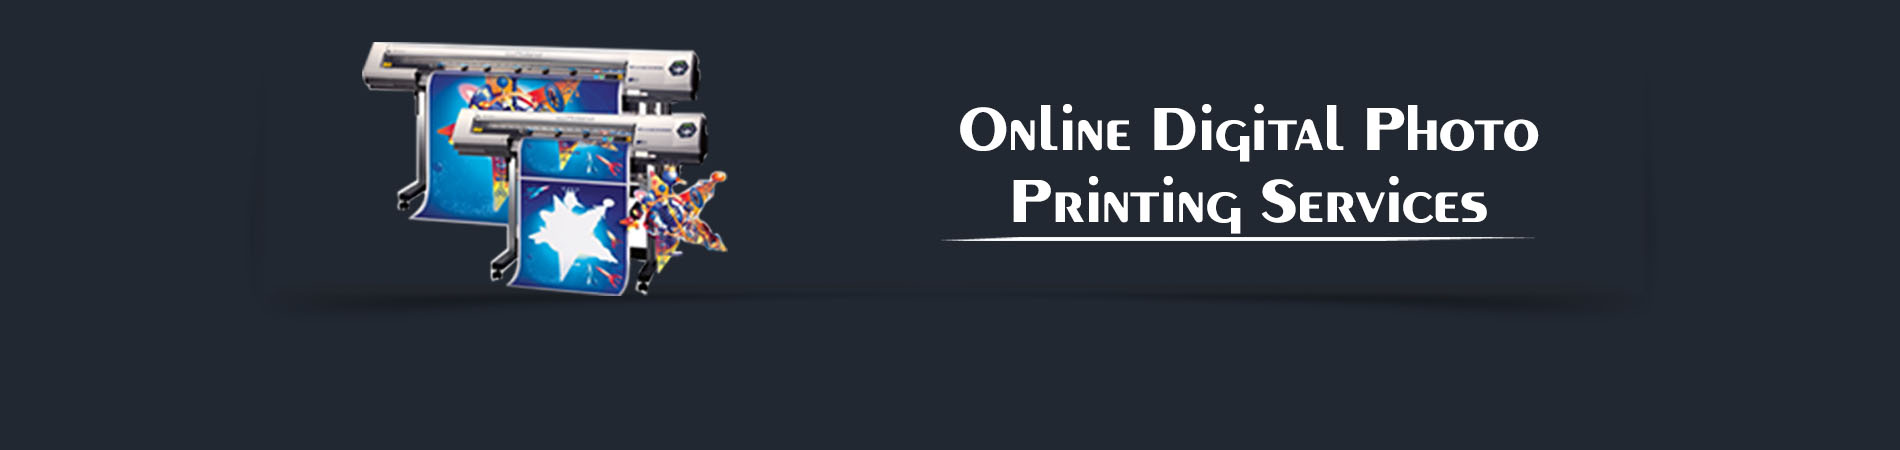 Online Digital Photo Printing Services in India